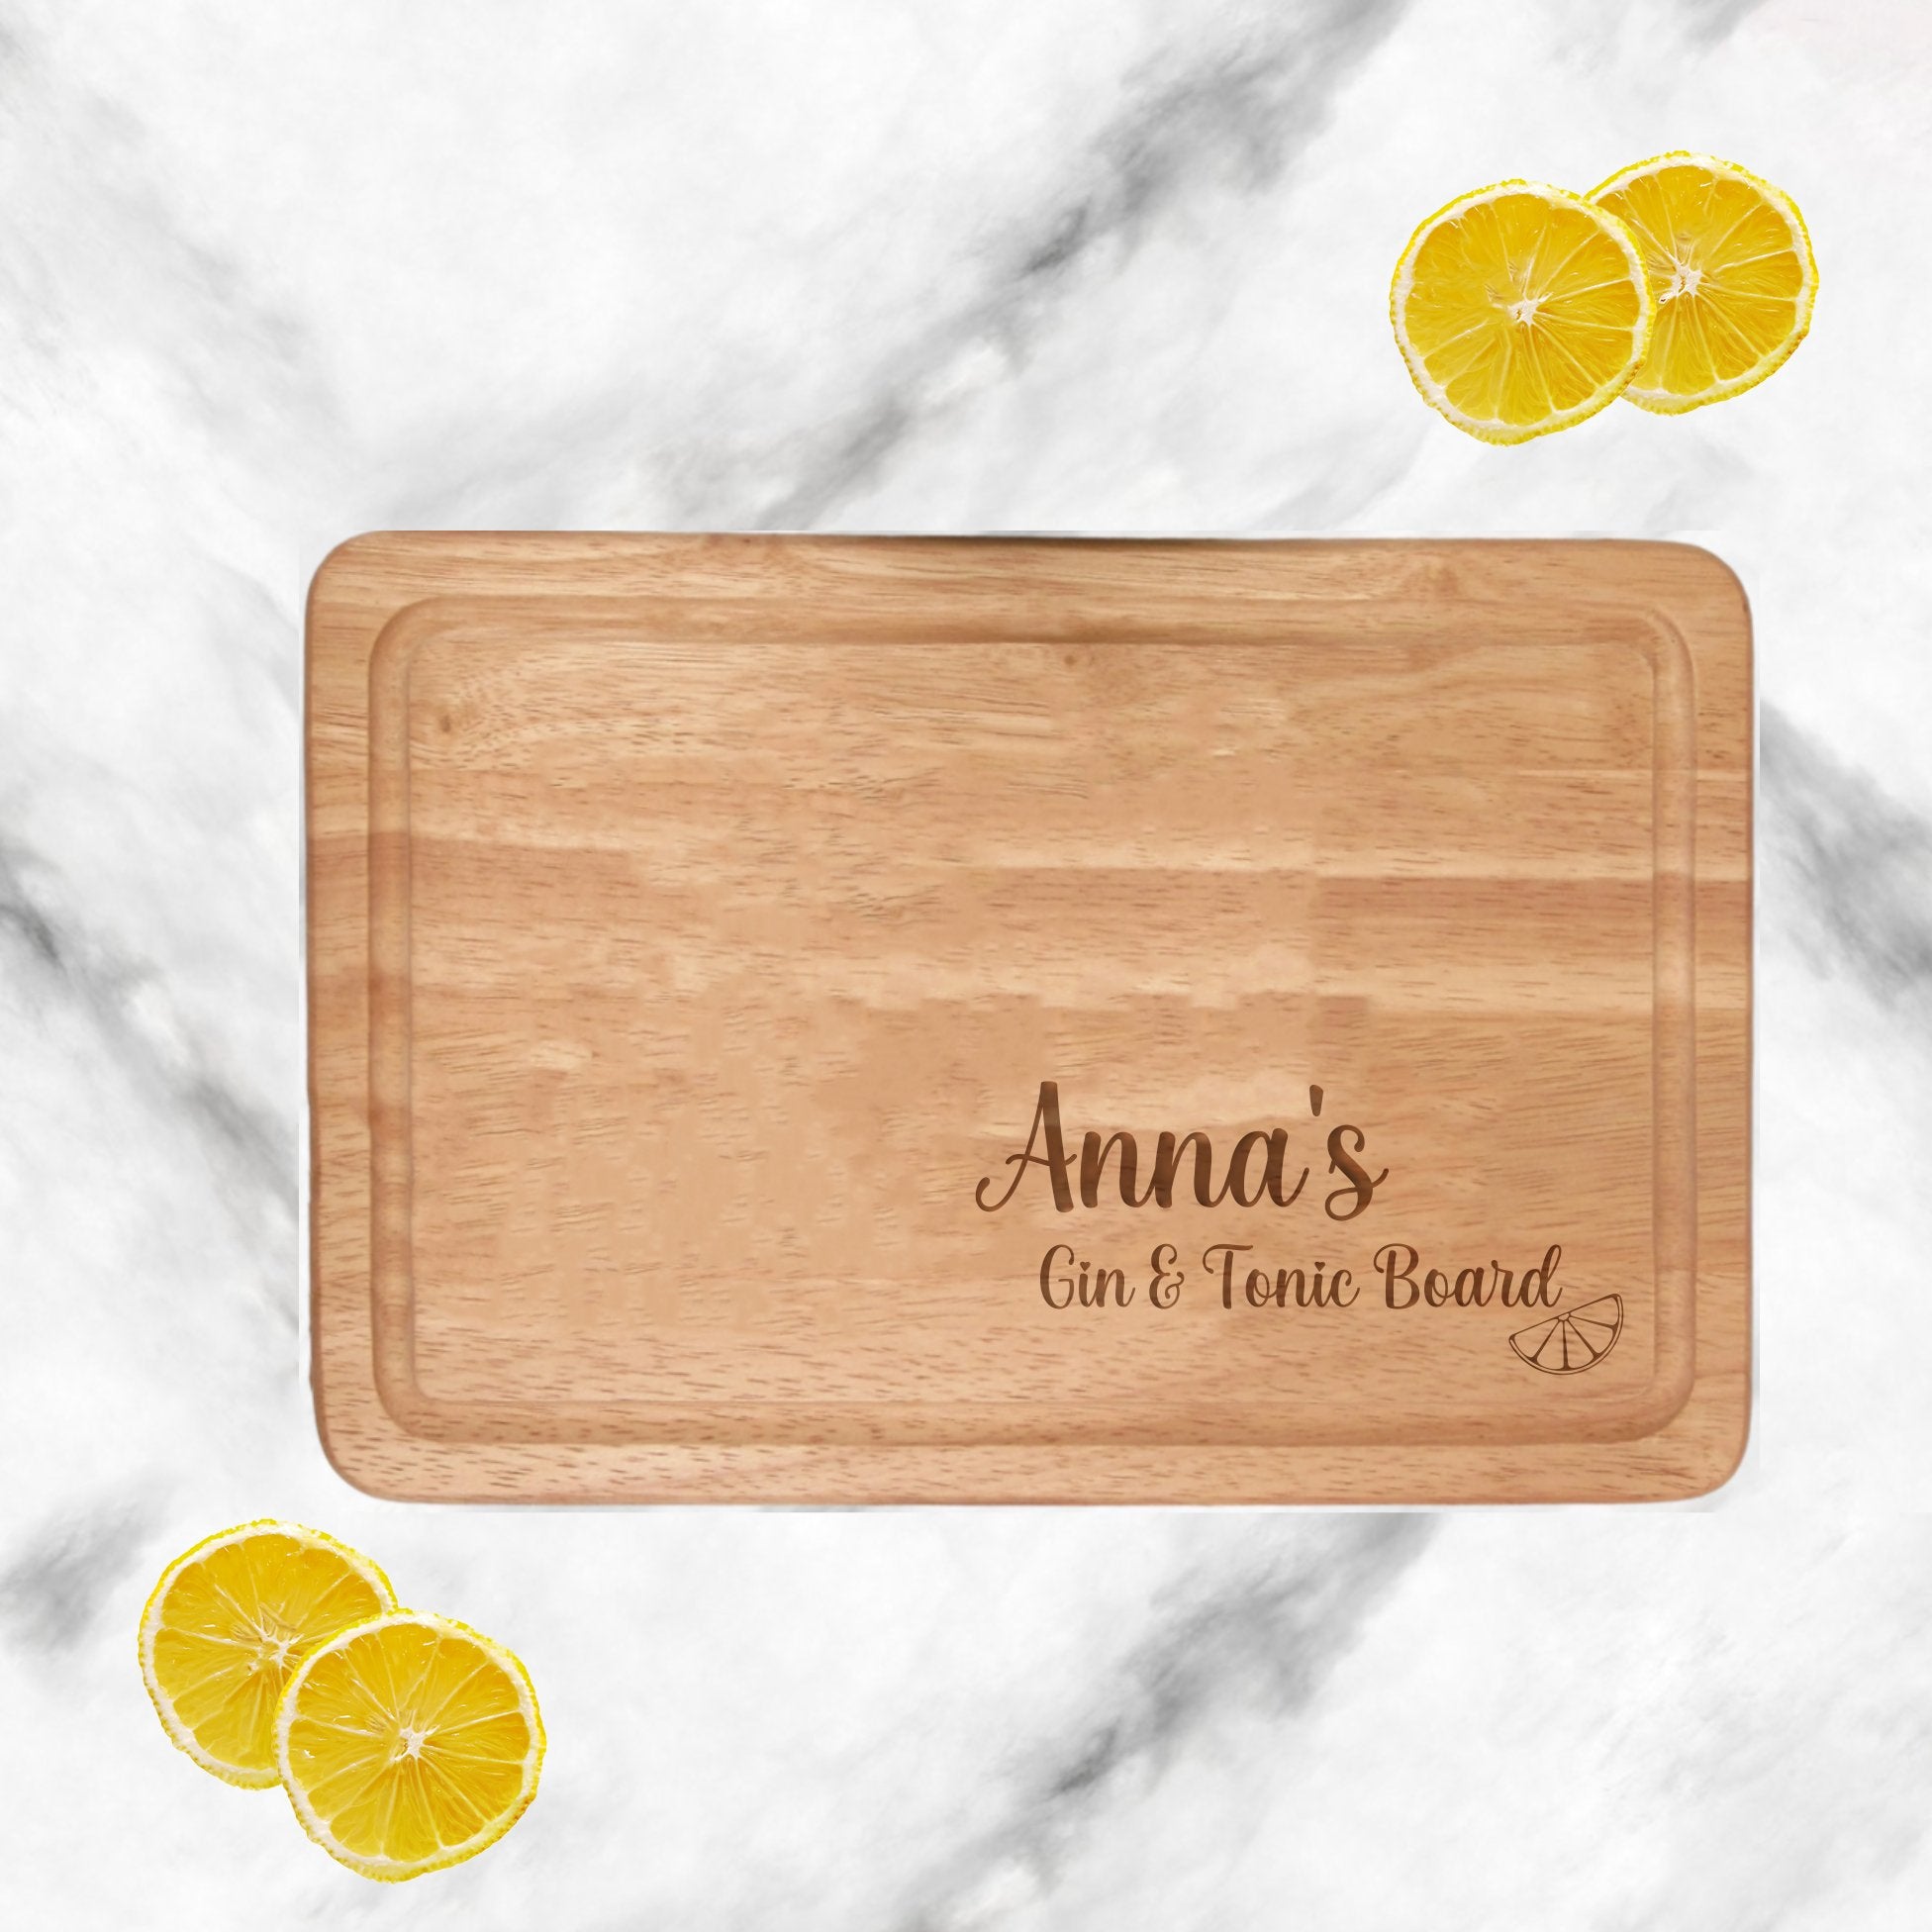 Image Description: A personalised Chopping board G&T crafted from high-quality wood. Engraved with a custom name, it serves as a unique and stylish personalised birthday or housewarming personalised gift for her. The board features a standard message 'Gin & Tonic Board with Engraved Lemon,' adding an extra touch of charm to any kitchen.